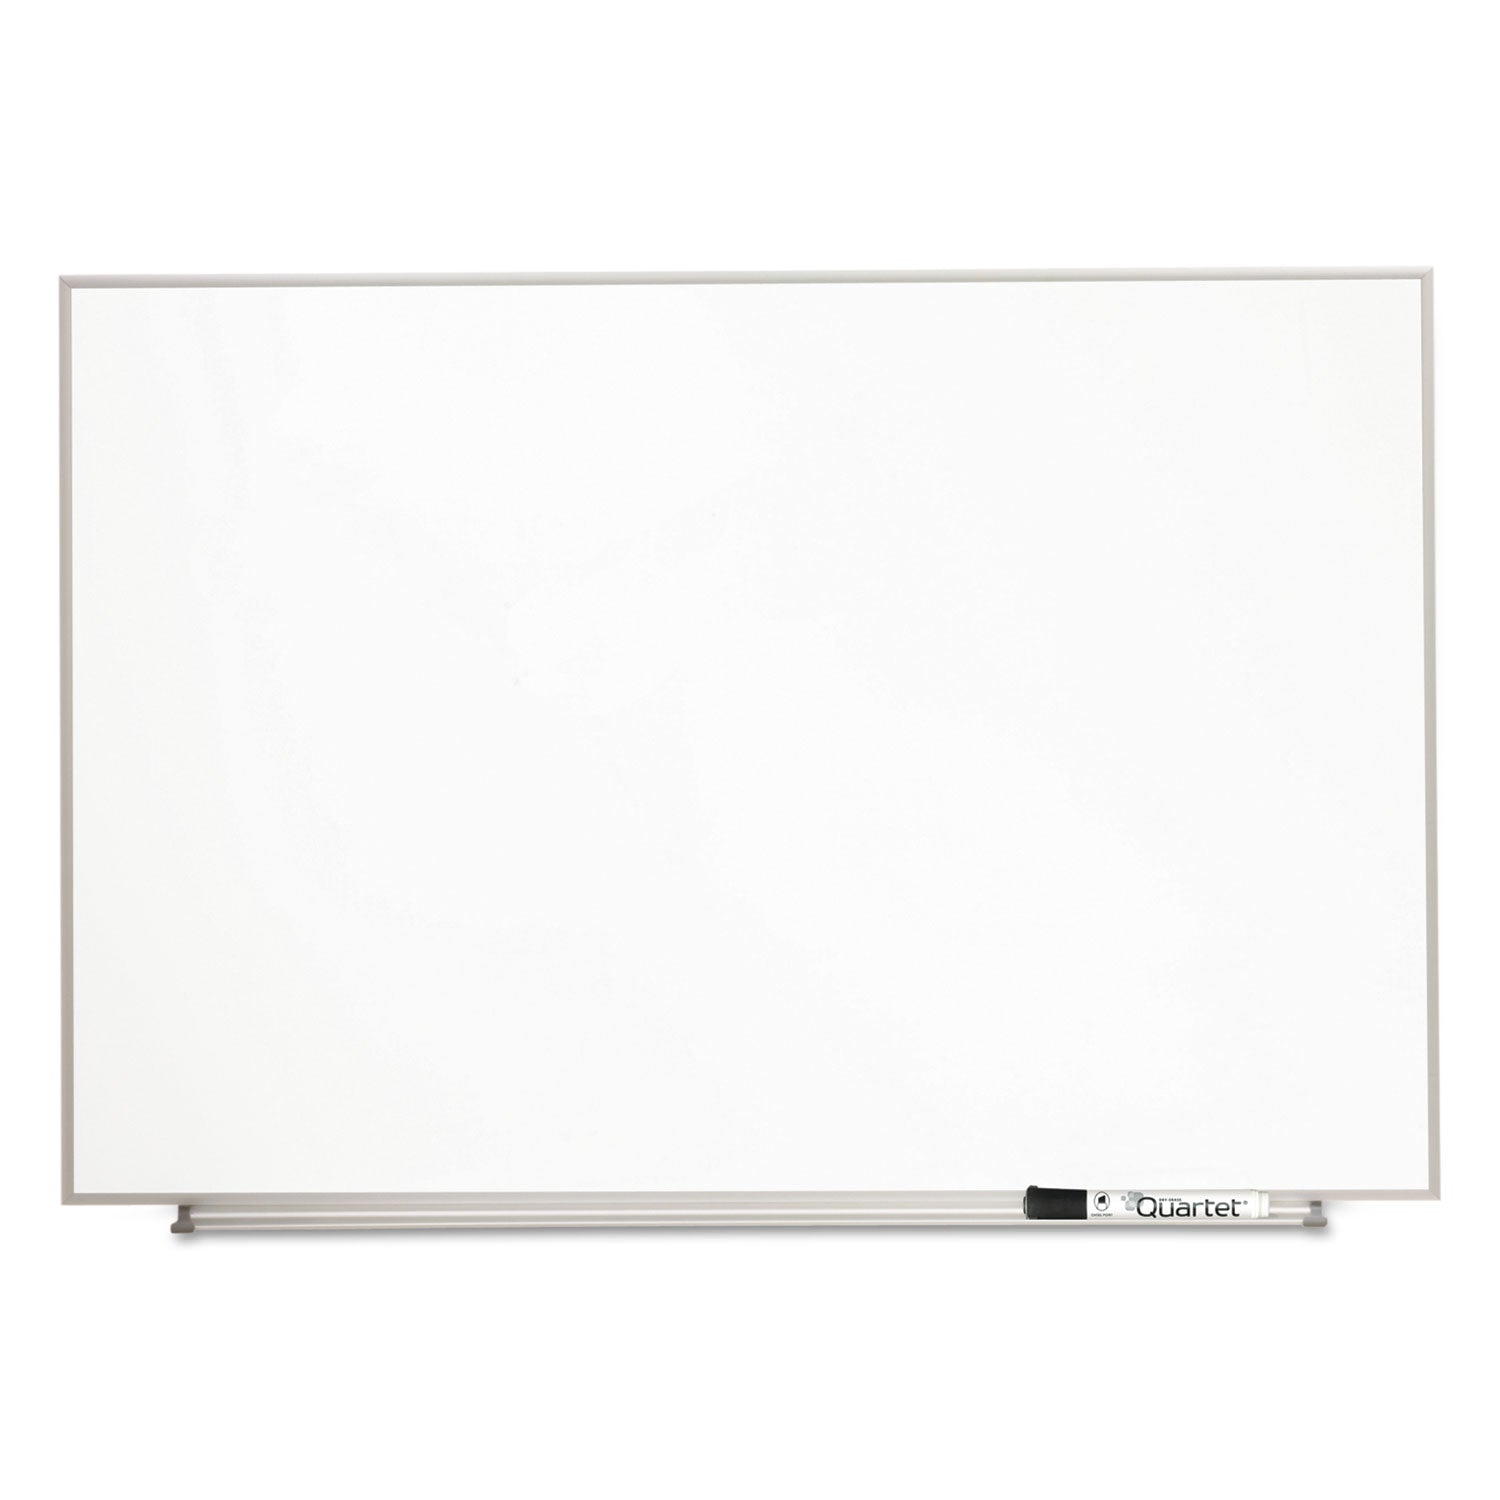 Matrix Magnetic Boards, 23 x 16, White Surface, Silver Aluminum Frame - 